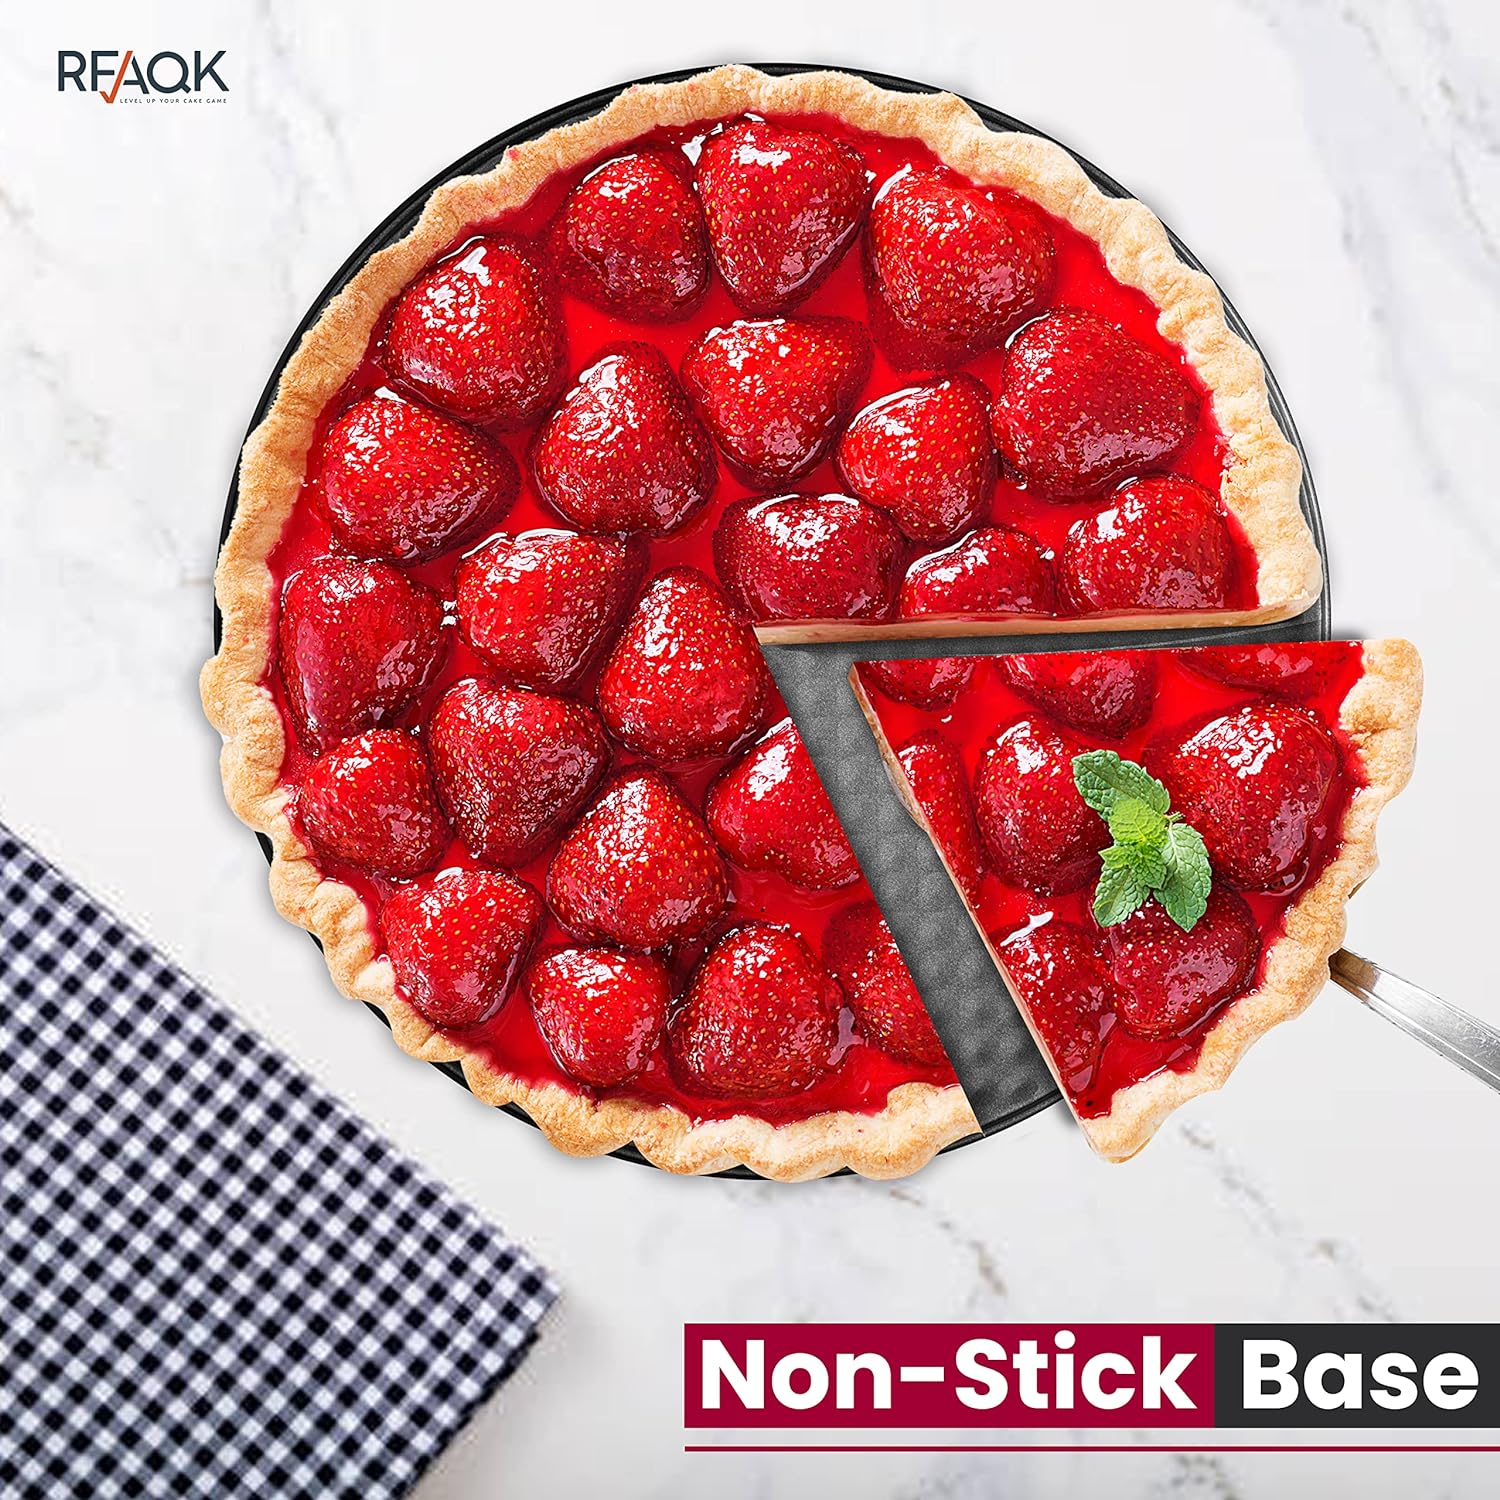 RFAQK 8 Inch Springform Cake Pan-Nonstick Baking Set with Removable Bottom,Leakproof Cheesecake Pan with 50Pcs Parchment Papers,(E-Book Included)